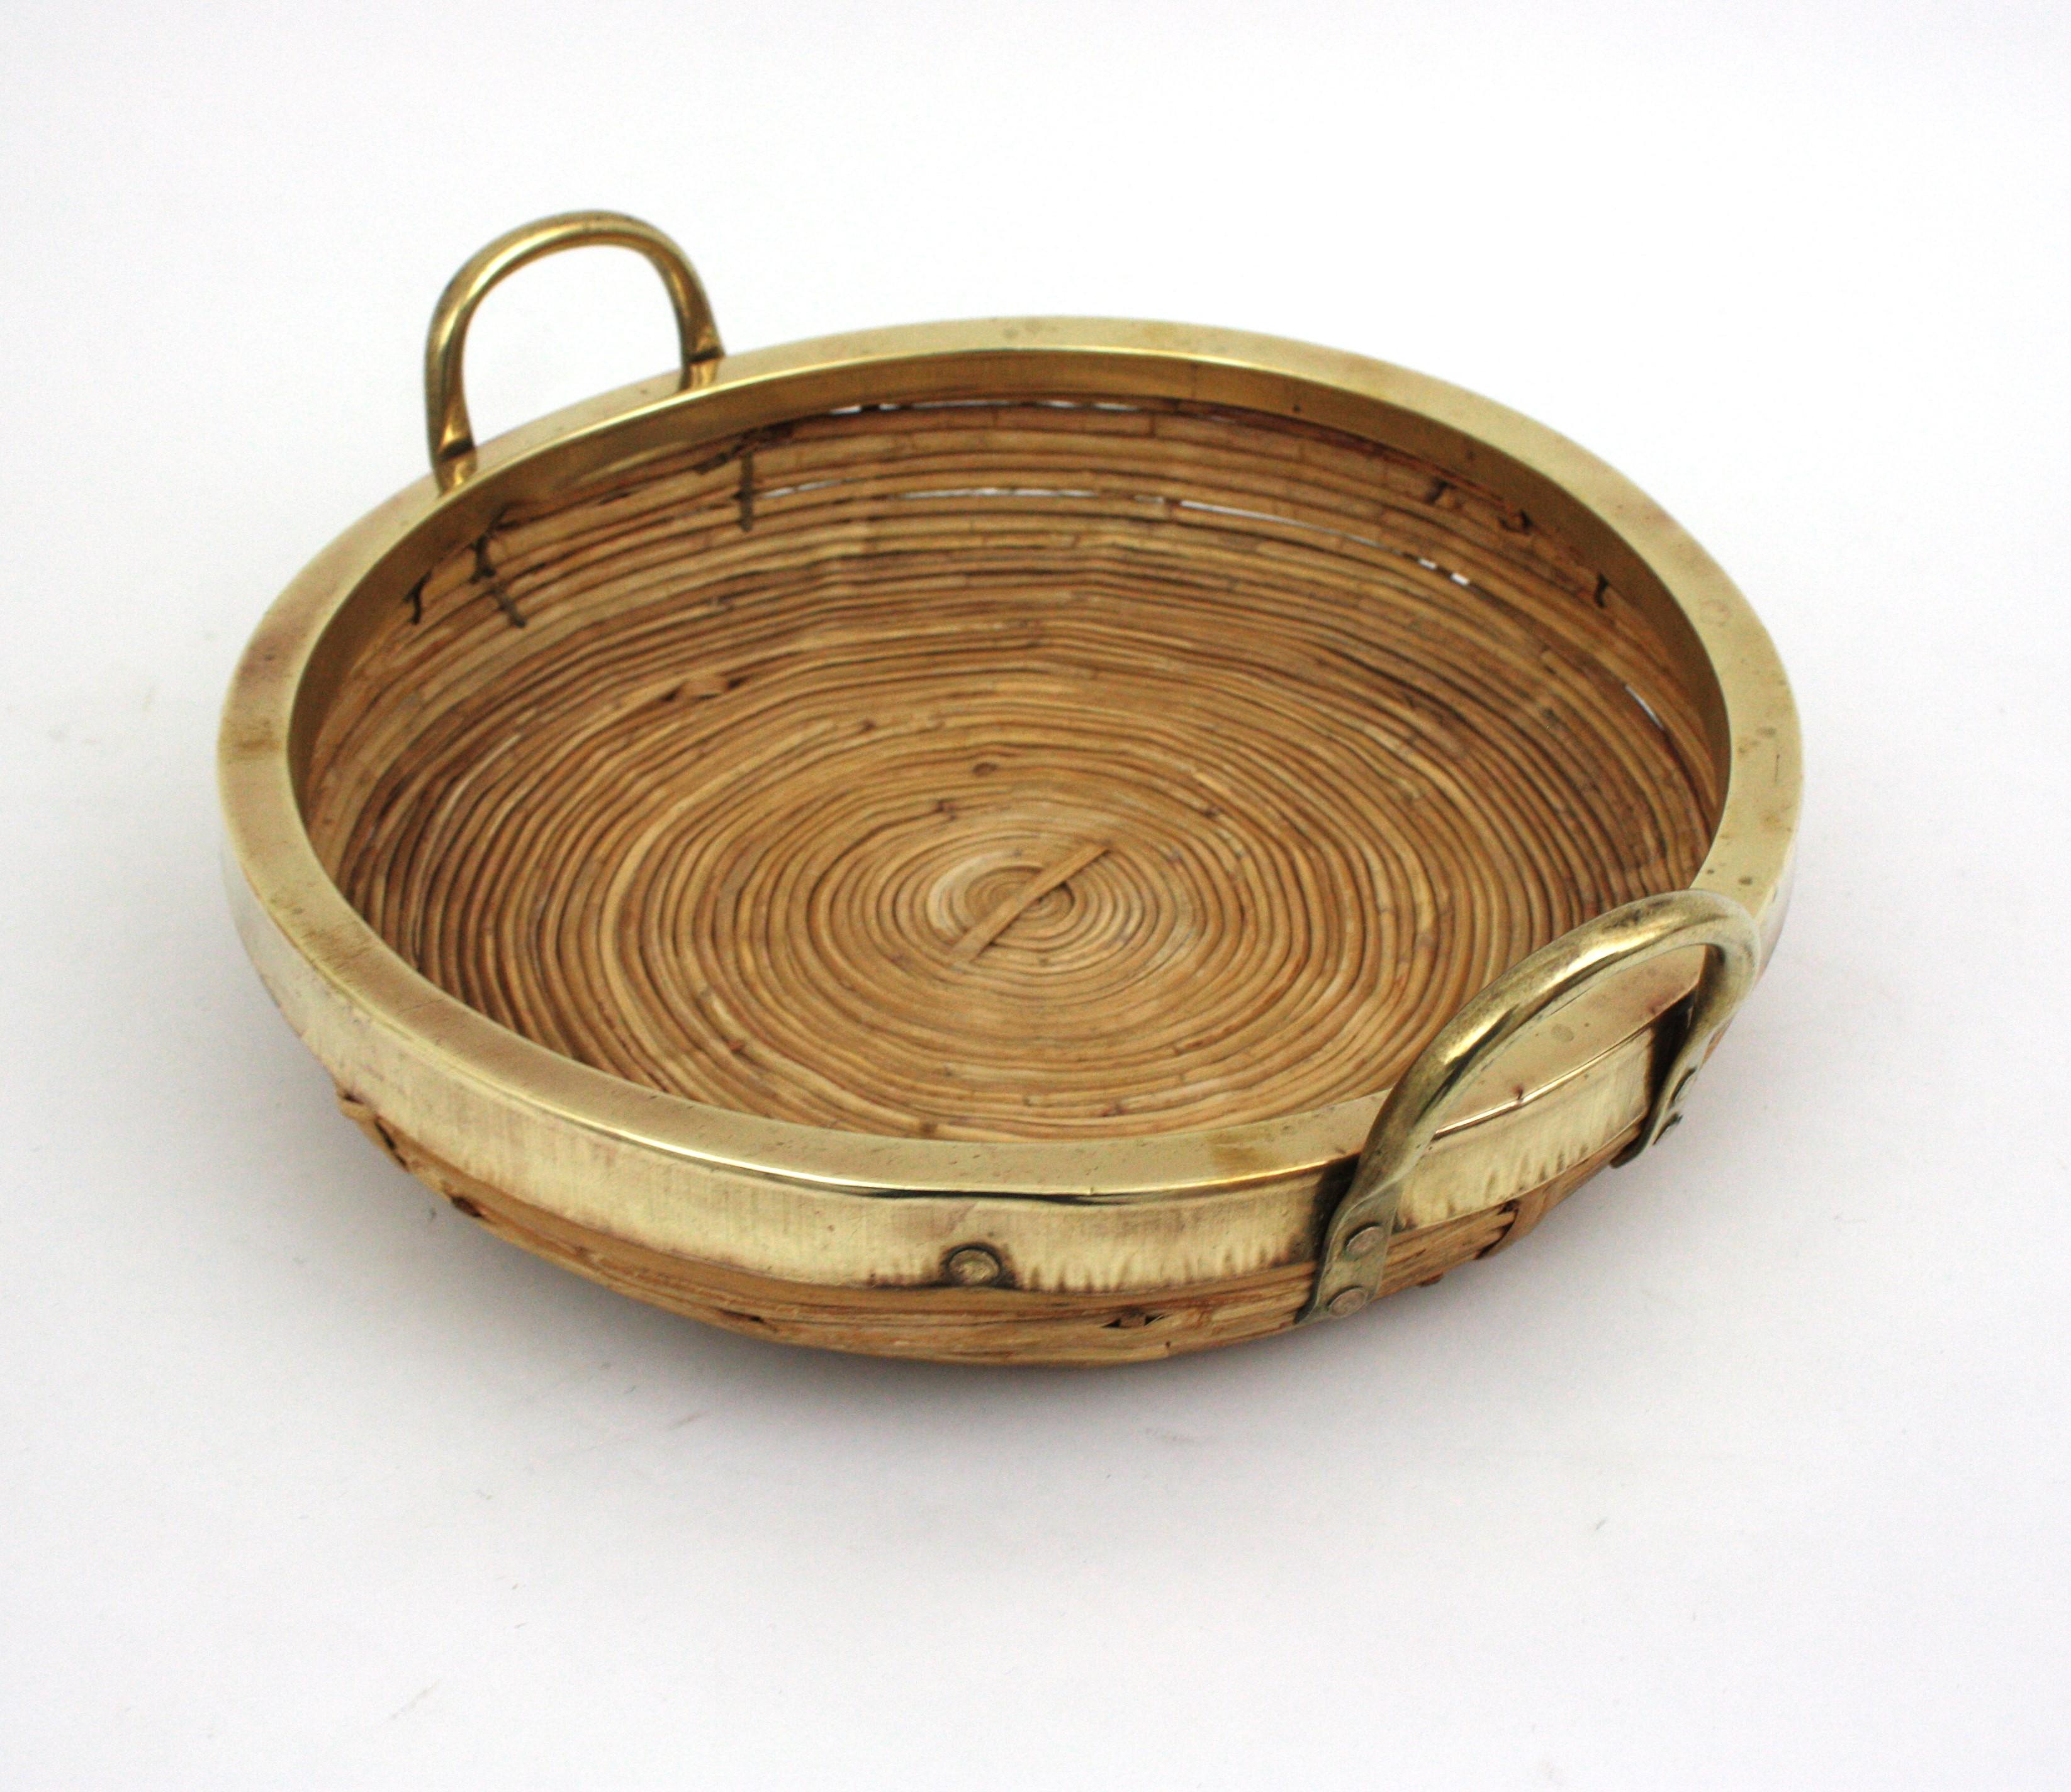 Rattan and Brass Italian Centerpiece Tray Basket, 1970s For Sale 7